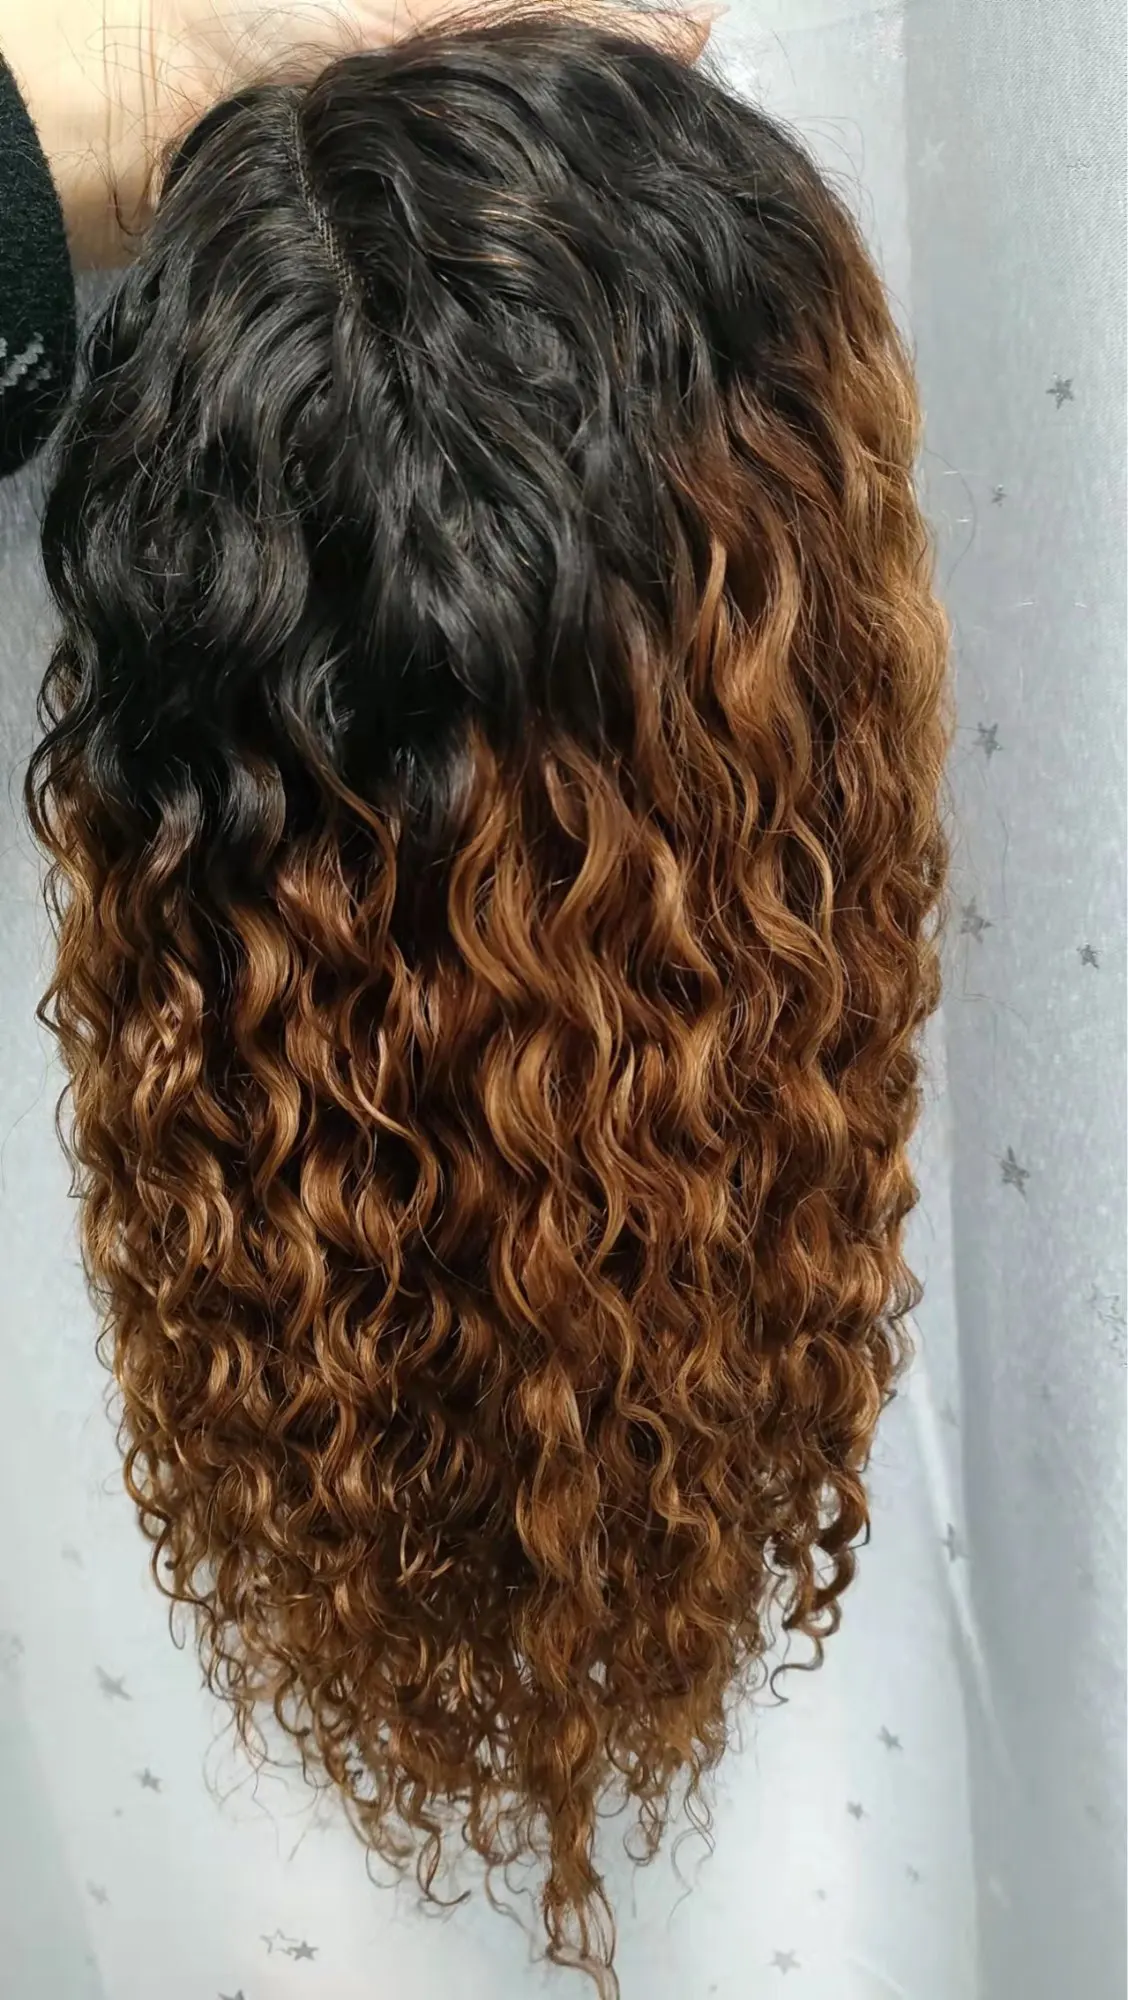 Brown Ombre Human Hair Wigs 13x4 Curly Lace Front Human Hair Wigs for Black Women Brazilian Lace Part Curly wigs Remy hair 150% photo review